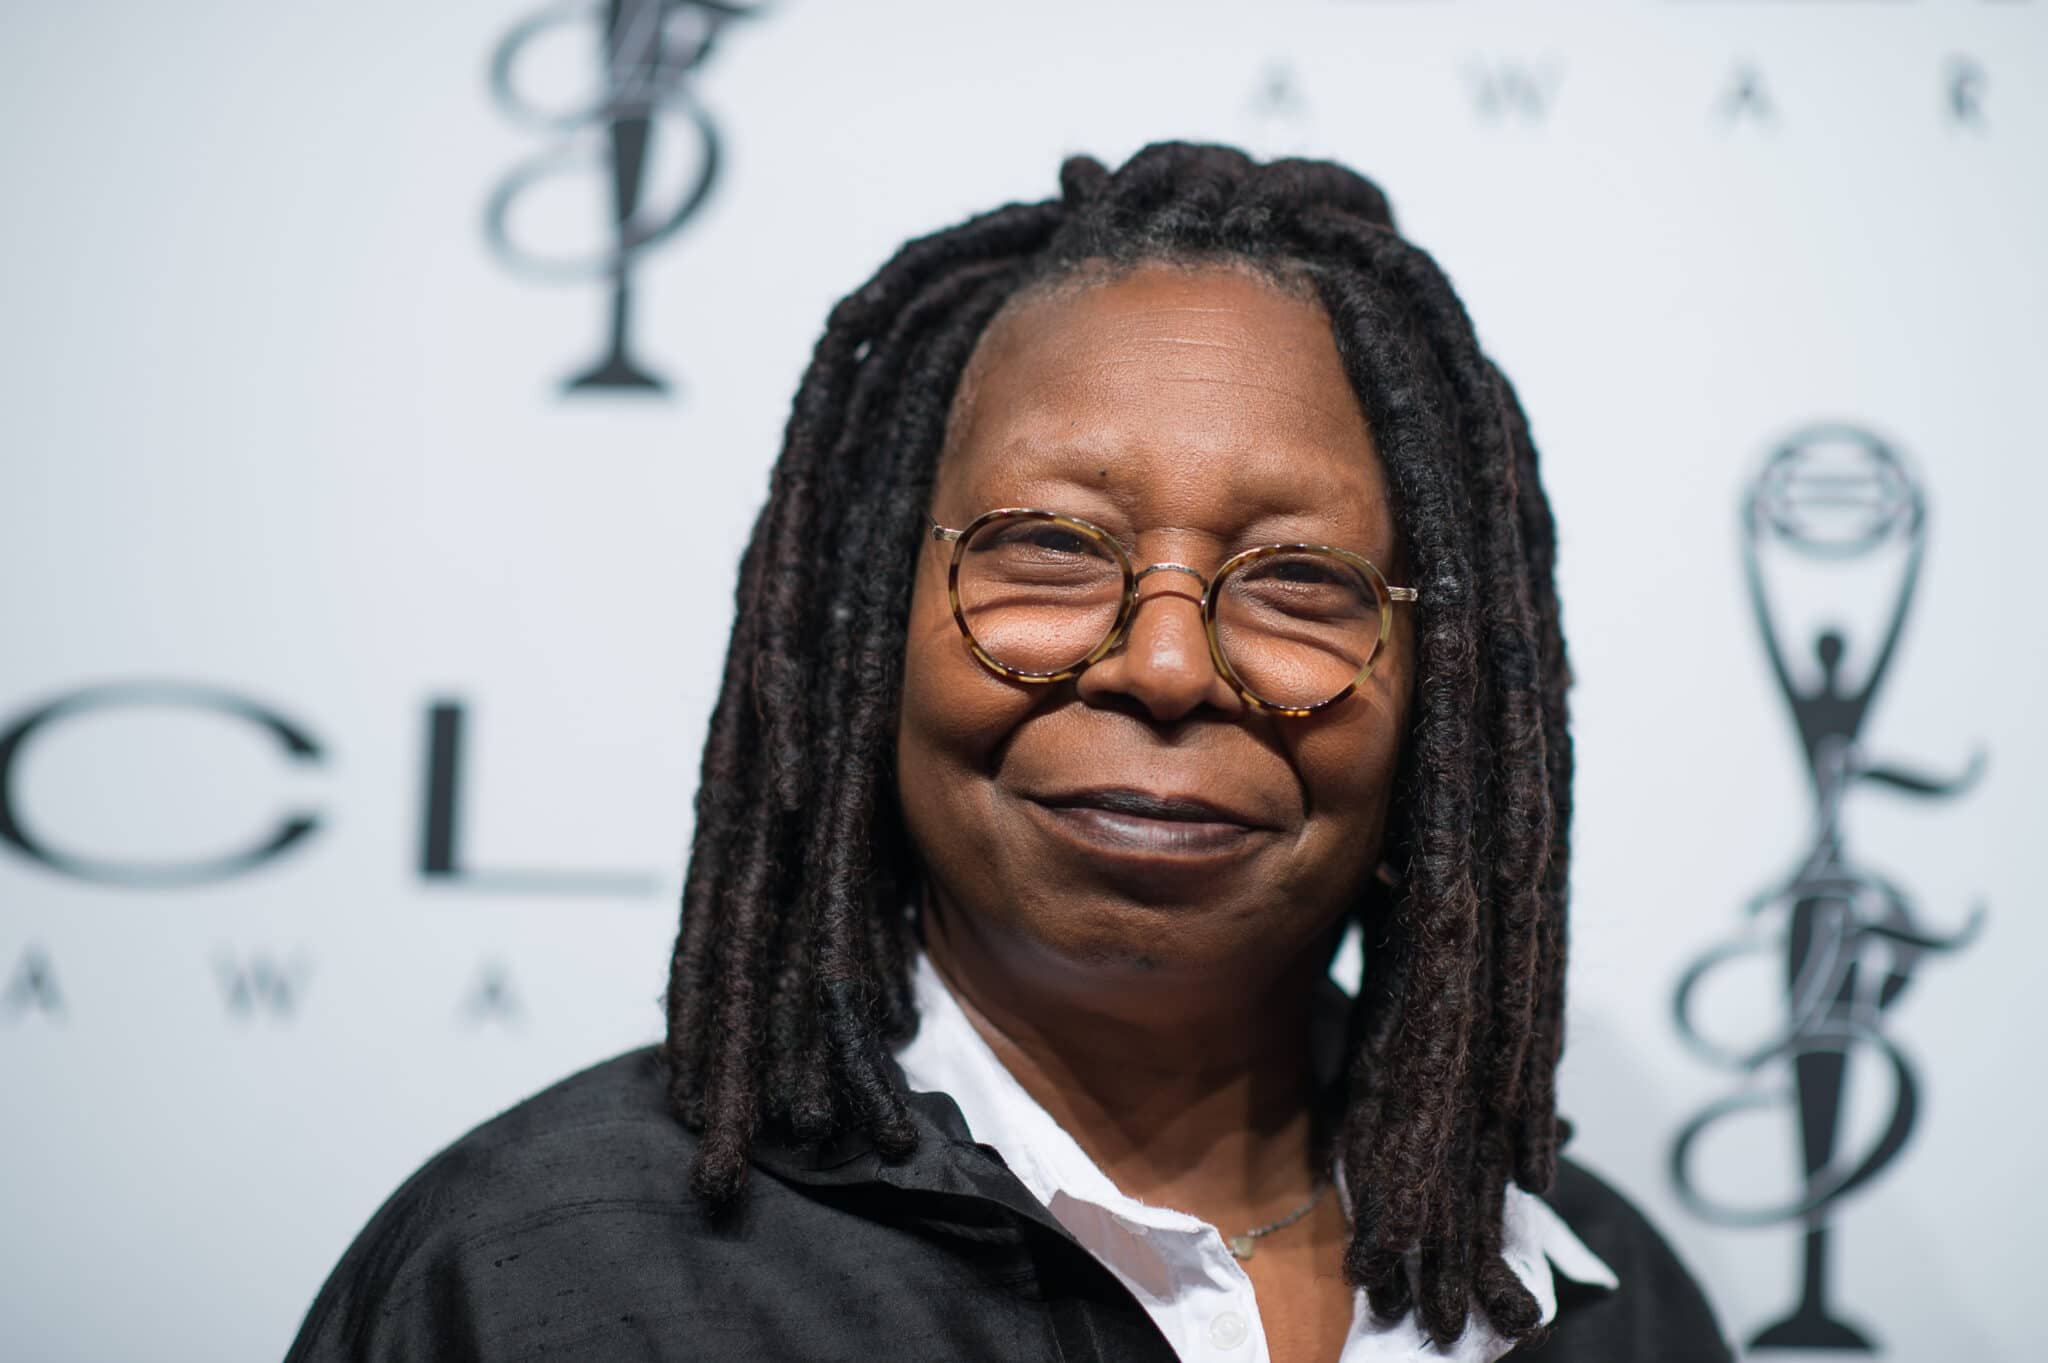 Whoopi Goldberg defends abortion rights in tense clash with ex-Trump aide